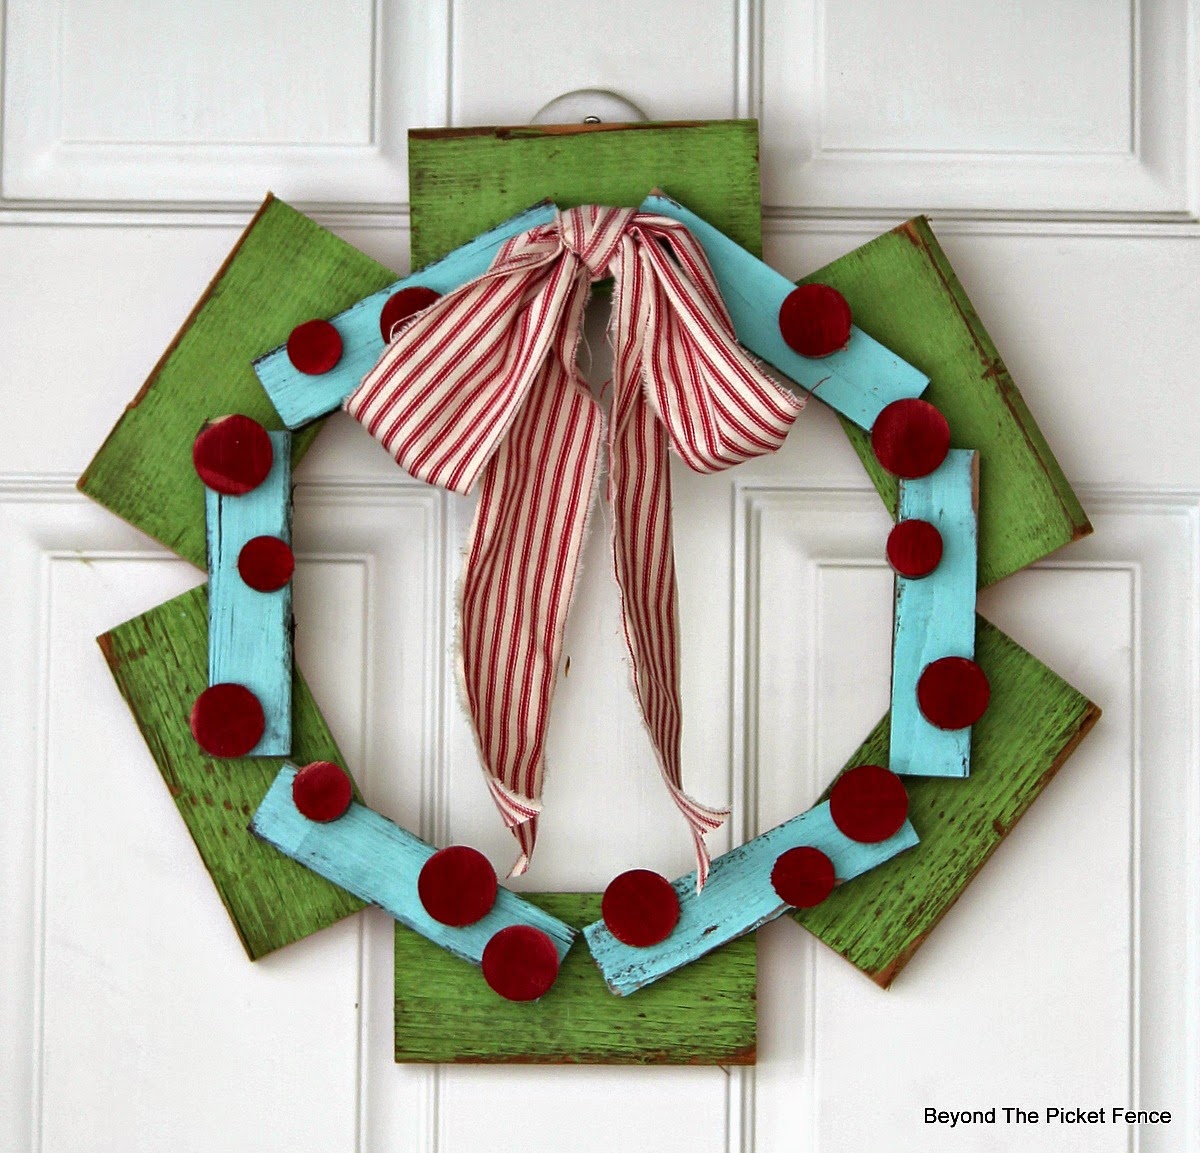 12 days of Christmas Scrap Wood Wreath http://bec4-beyondthepicketfence.blogspot.com/2014/11/12-days-of-christmas-day-3-scrap-wood_10.html